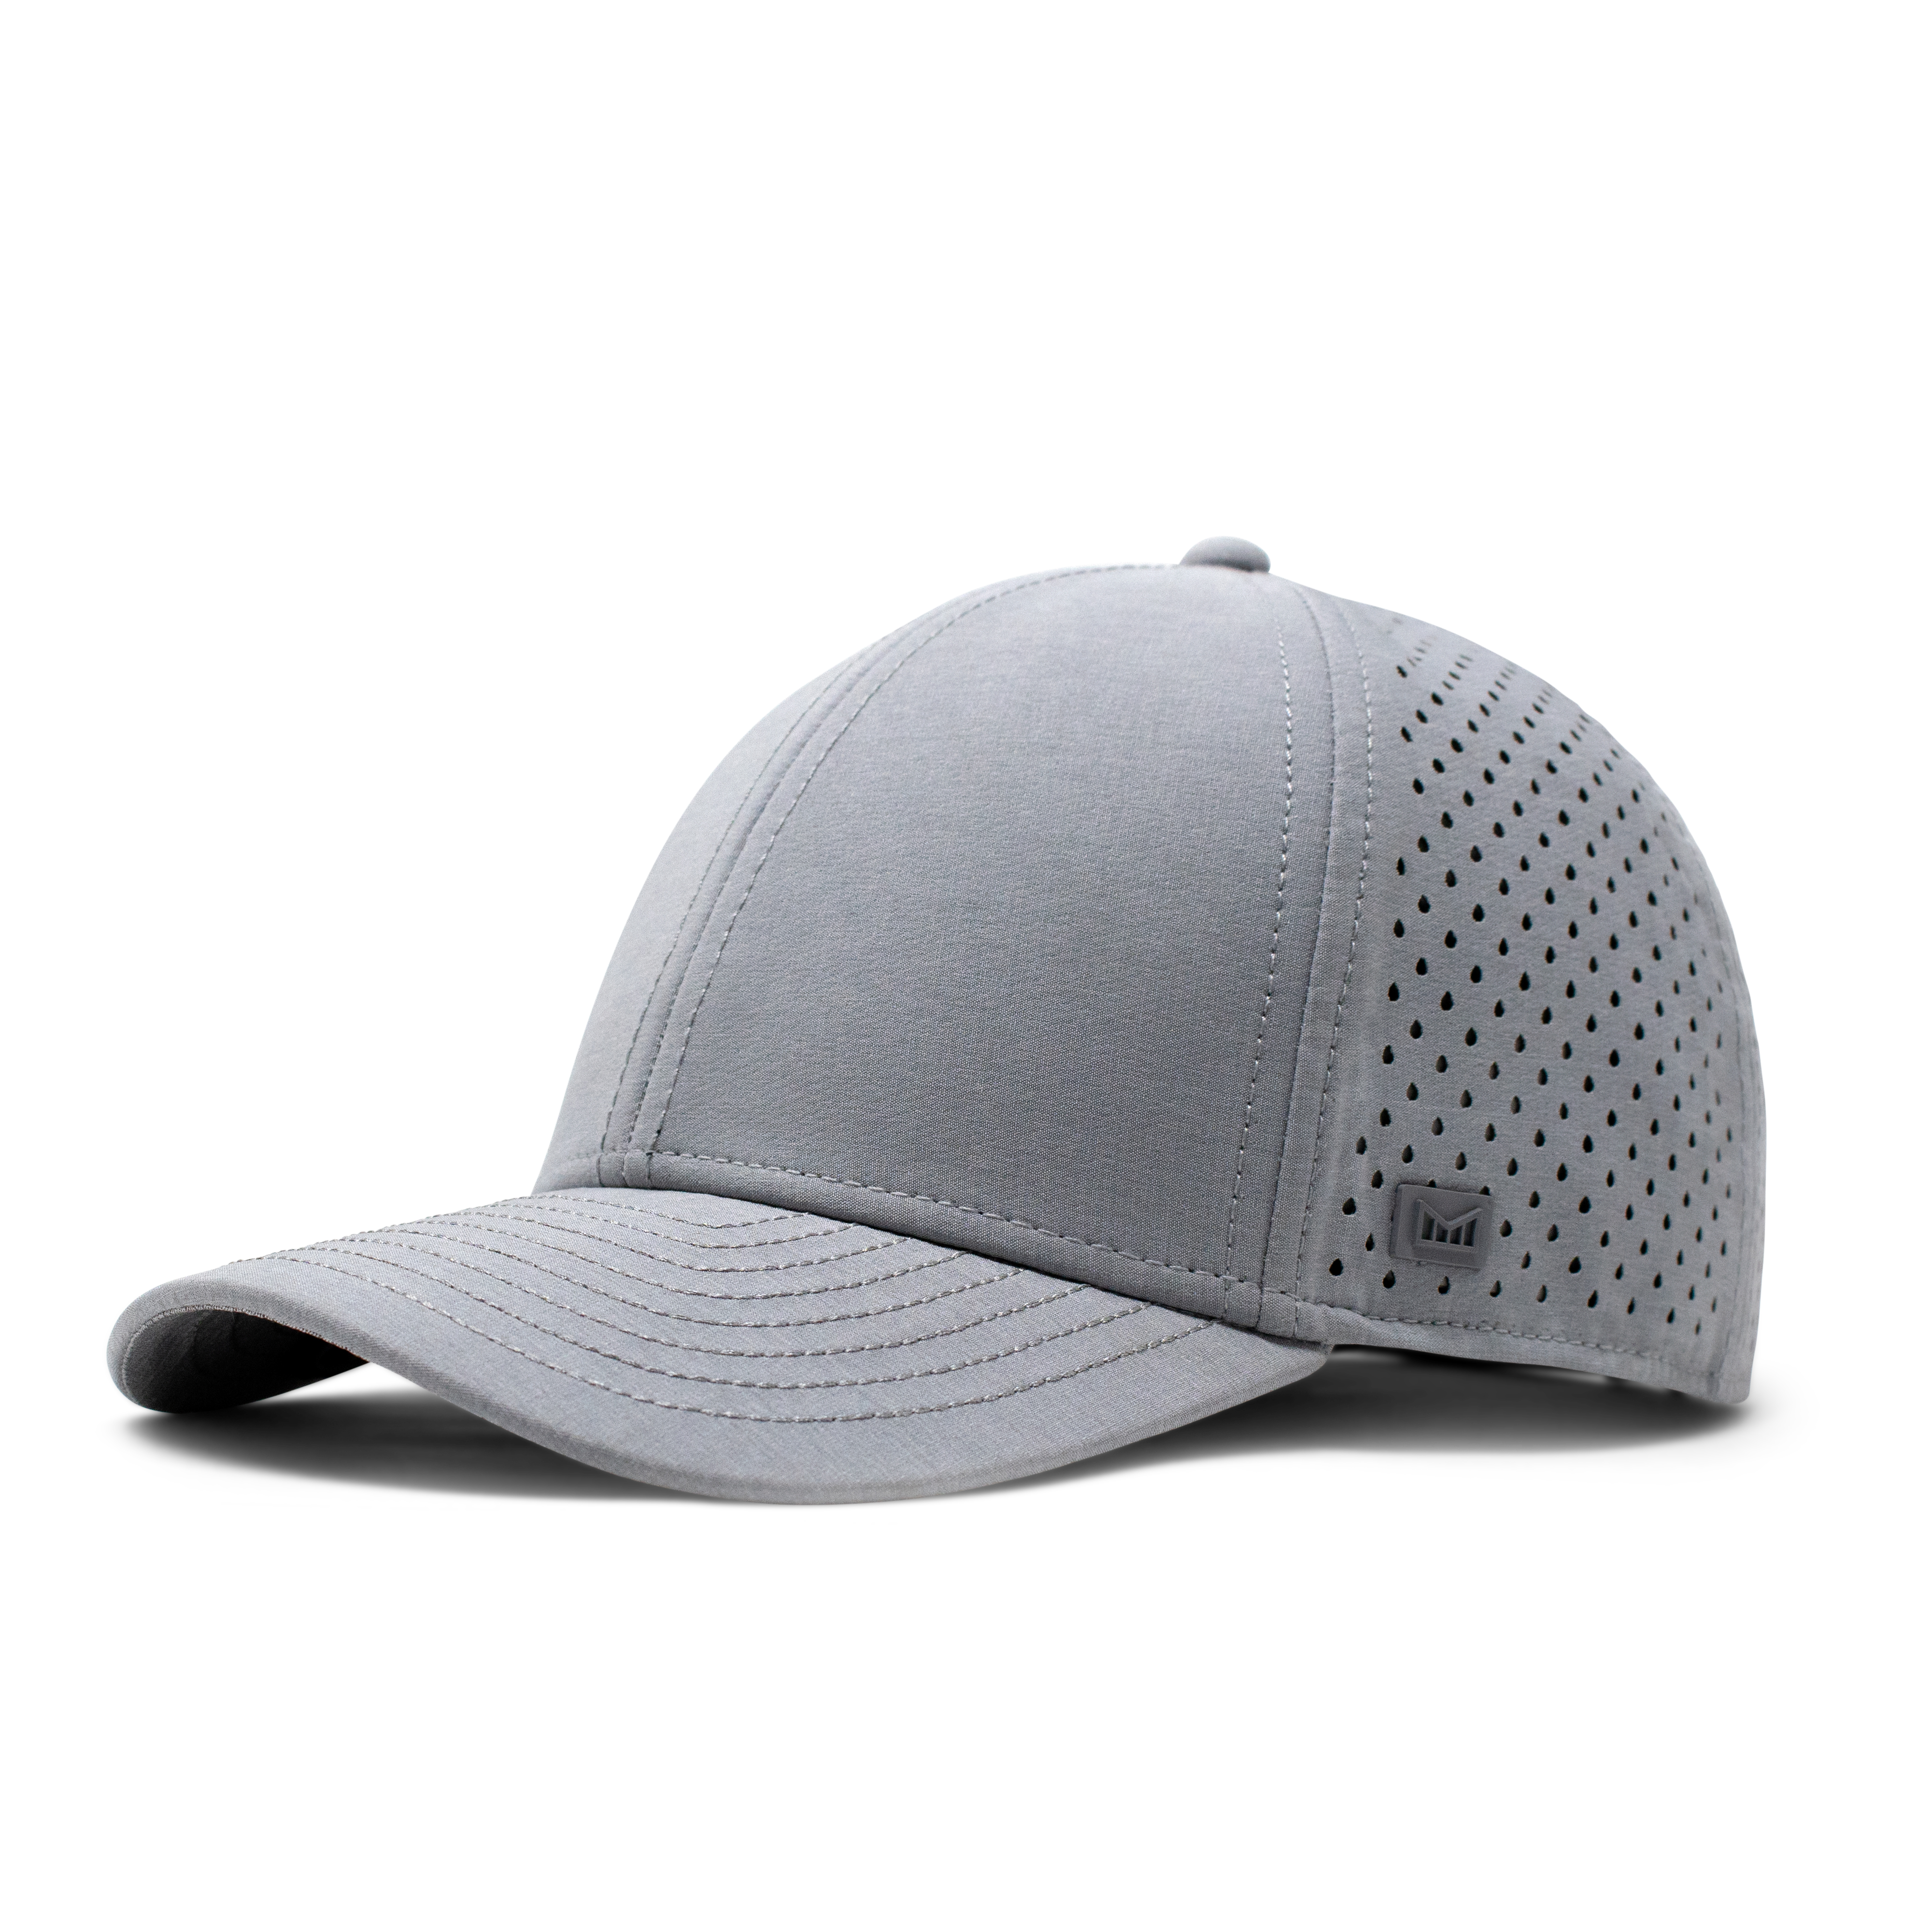 Melin A-Game Hydro Icon Snapback Hat - Men's - Classic,Light Grey/Maroon